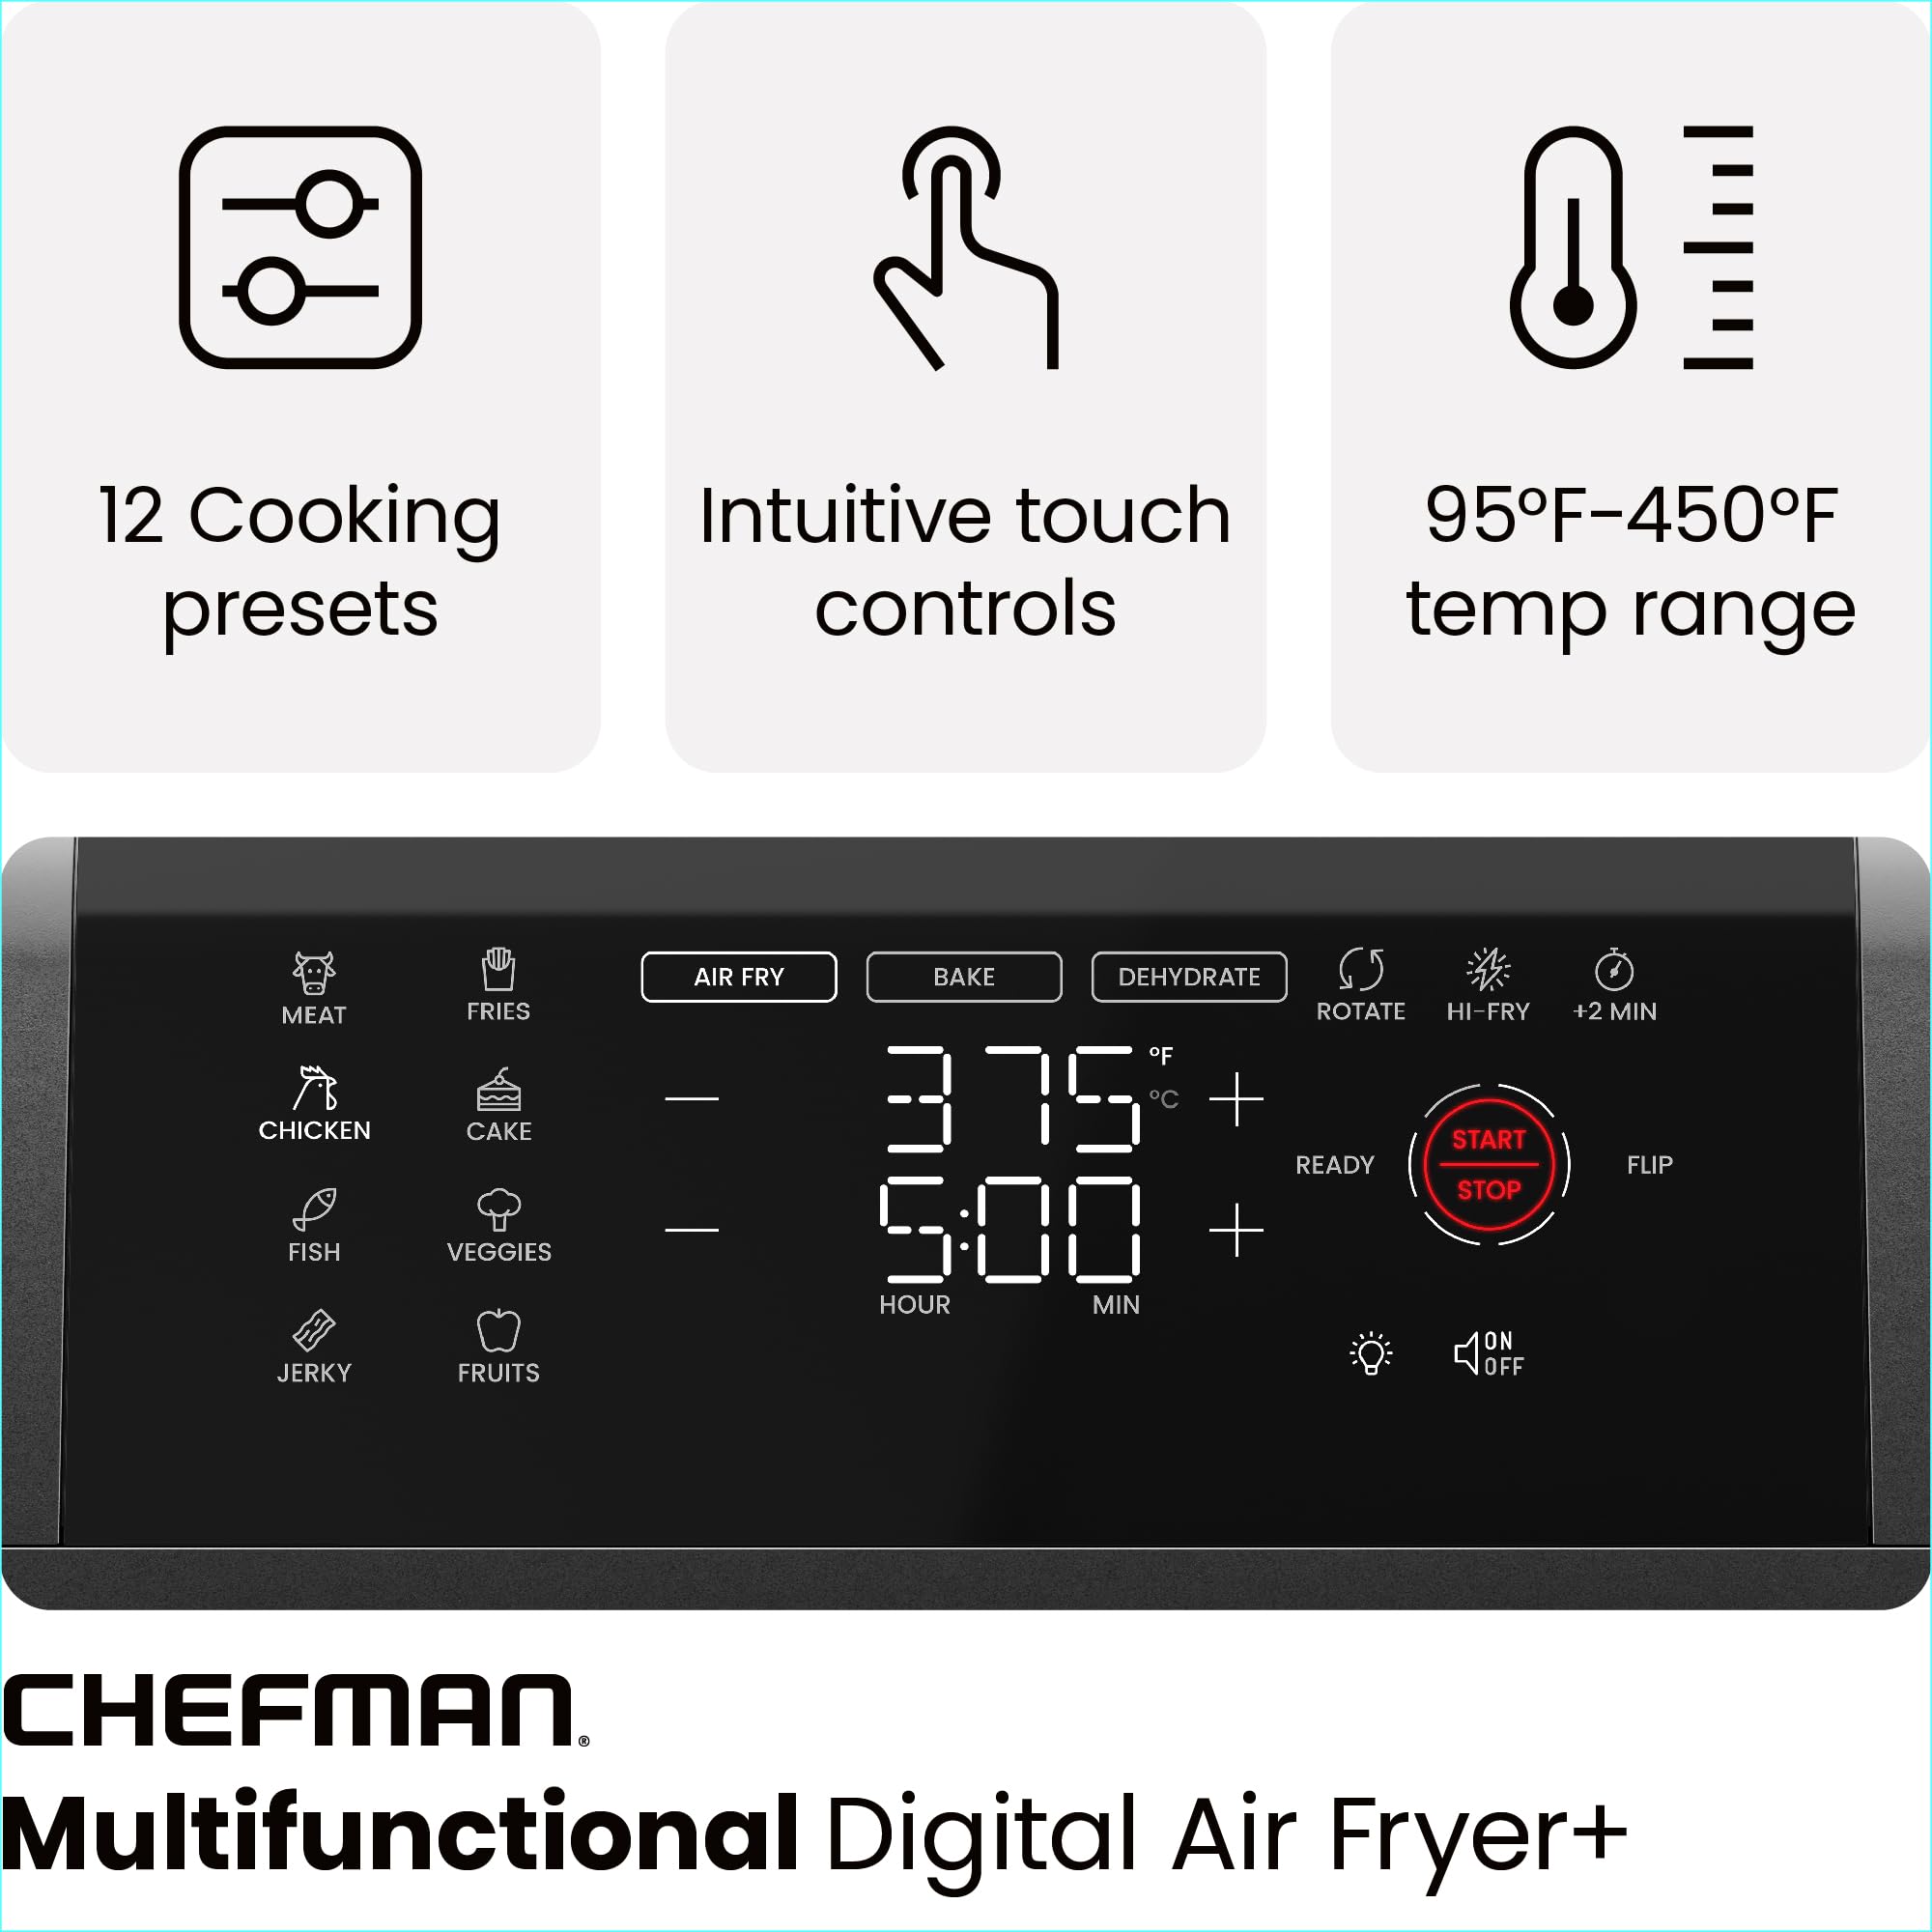 Chefman Air Fryer Oven - 12-Quart 6-in-1 Rotisserie Oven and Dehydrator, 12 Presets with Digital Timer and Touchscreen, Family Size XL Airfryer Countertop Convection Oven, Dishwasher-Safe Parts, Black